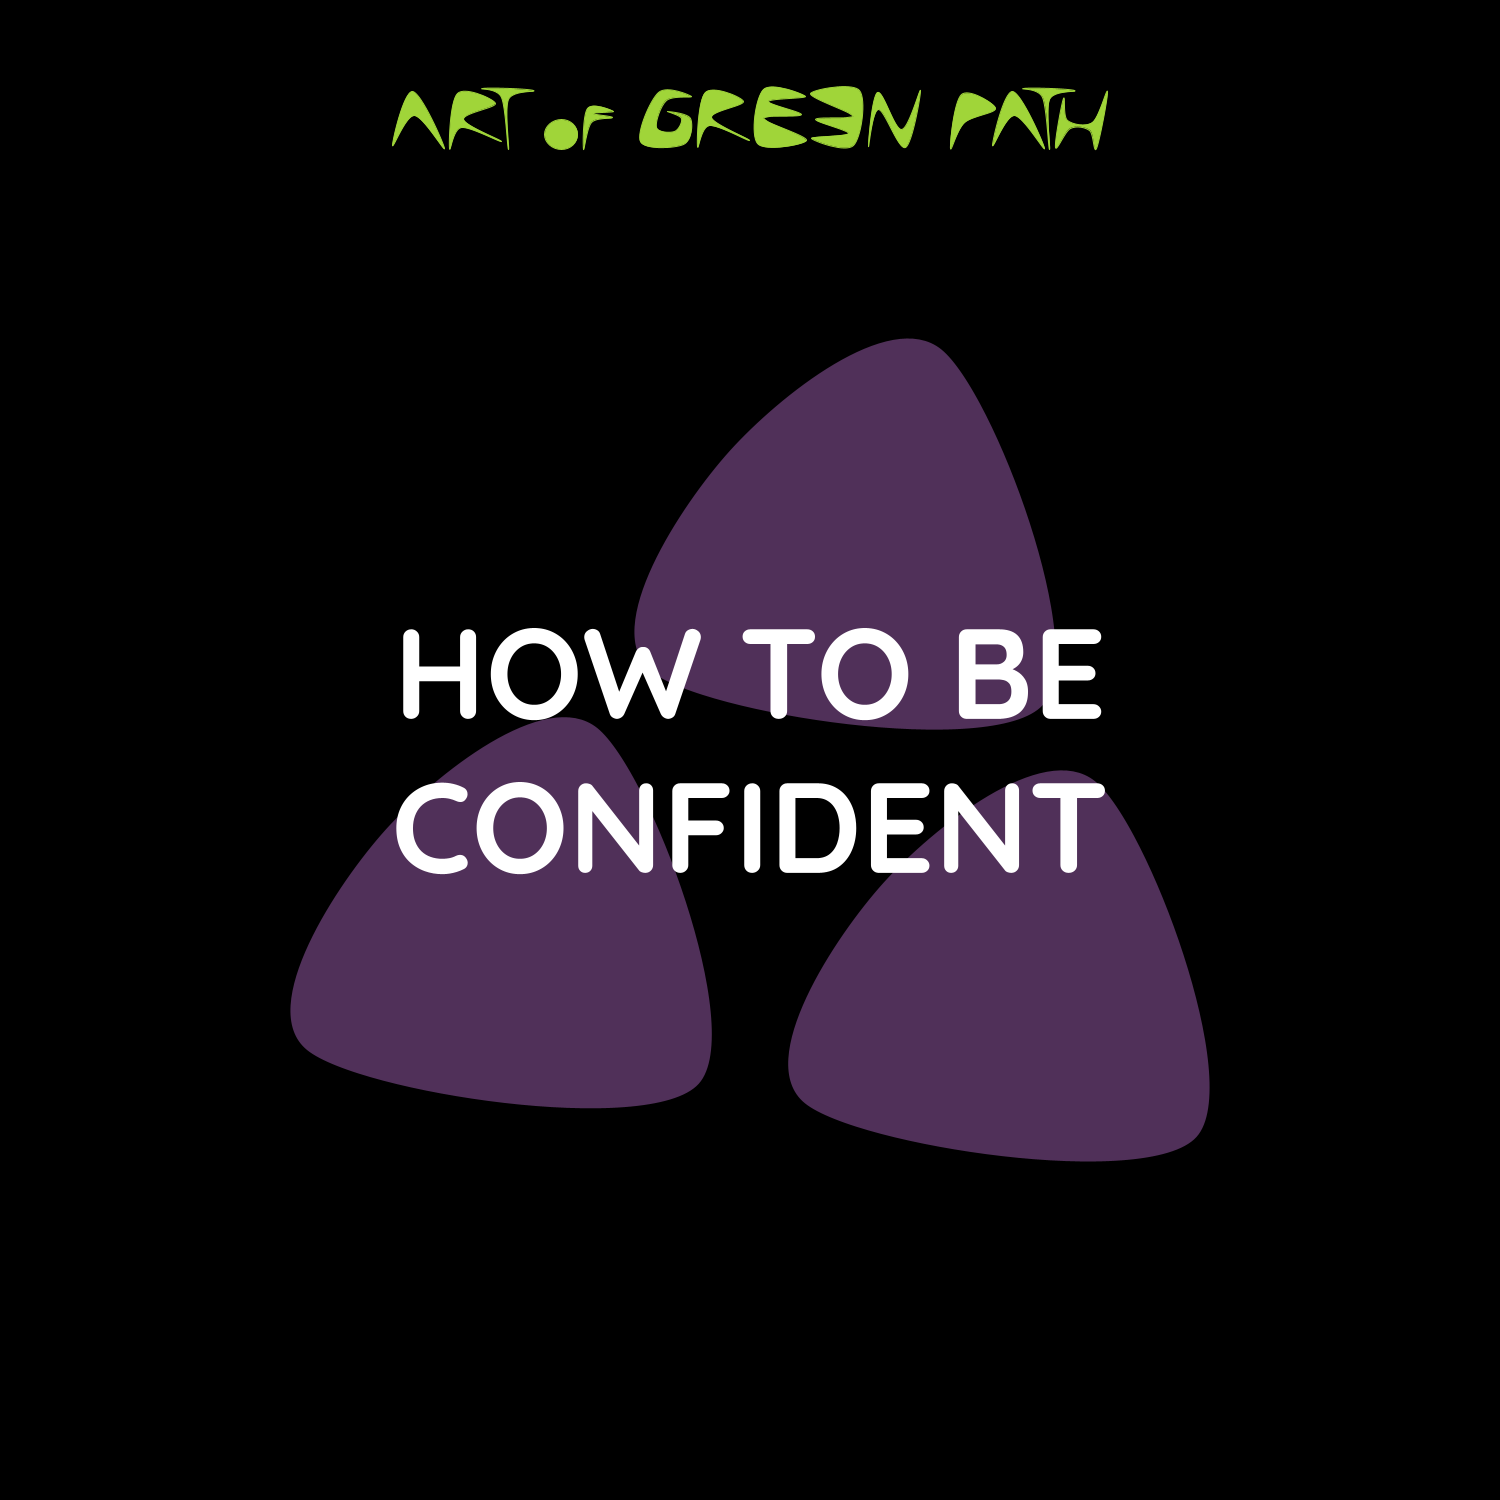 Art Of Green Path - Know Yourself - How To Be Confident